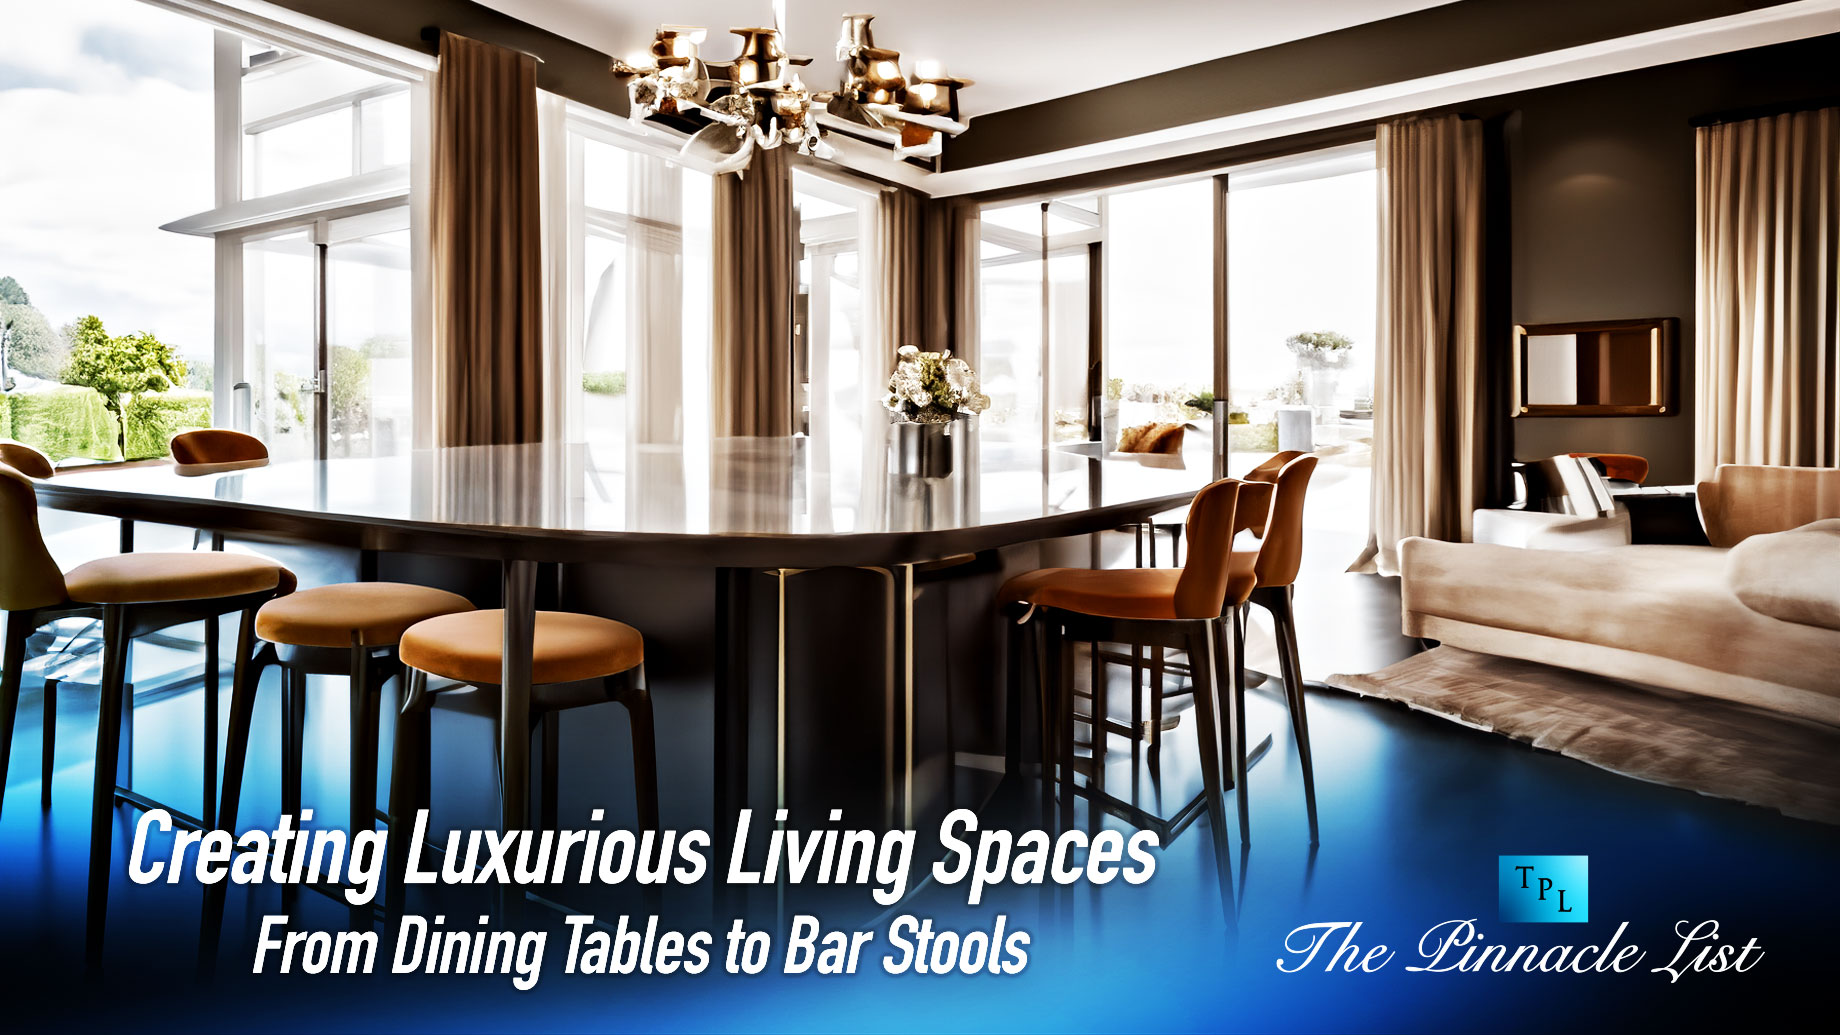 Creating Luxurious Living Spaces: From Dining Tables to Bar Stools